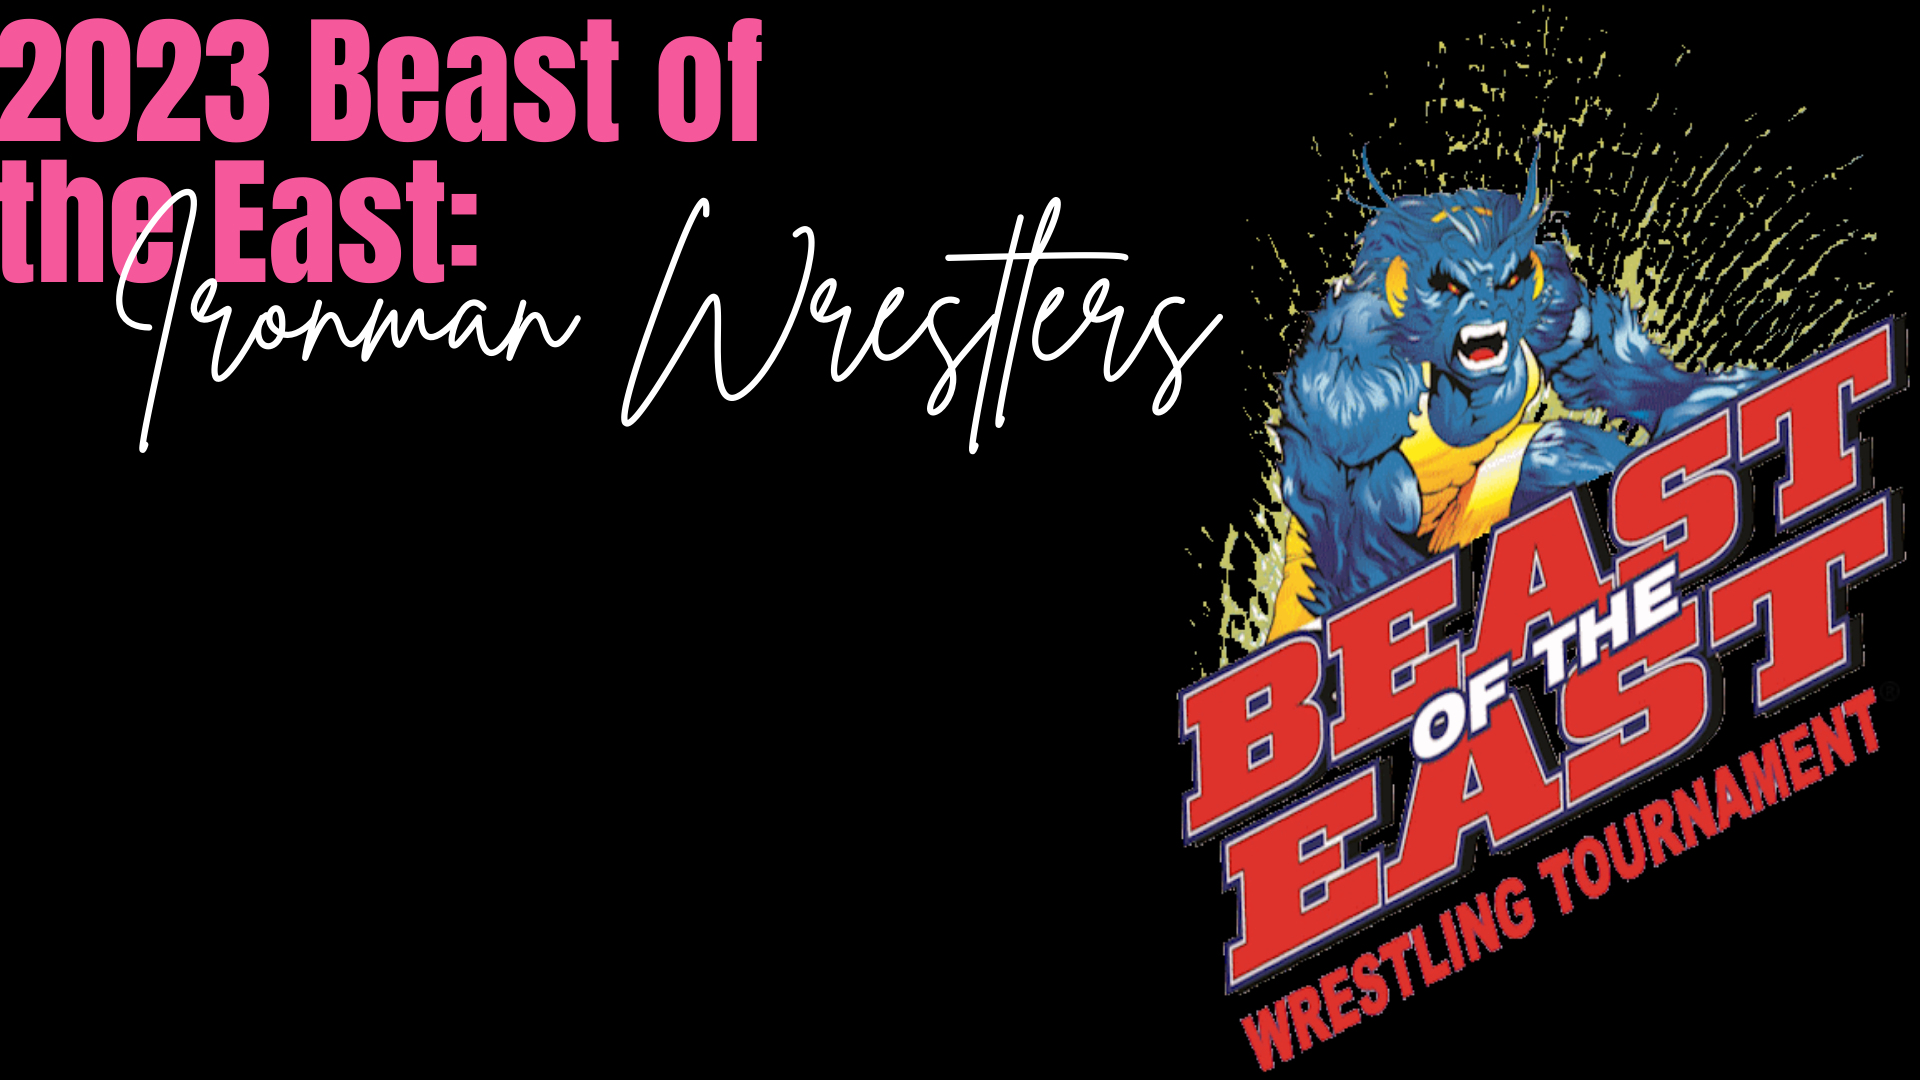 2023 Beast of the East Preview: Ironman Teams & Wrestlers